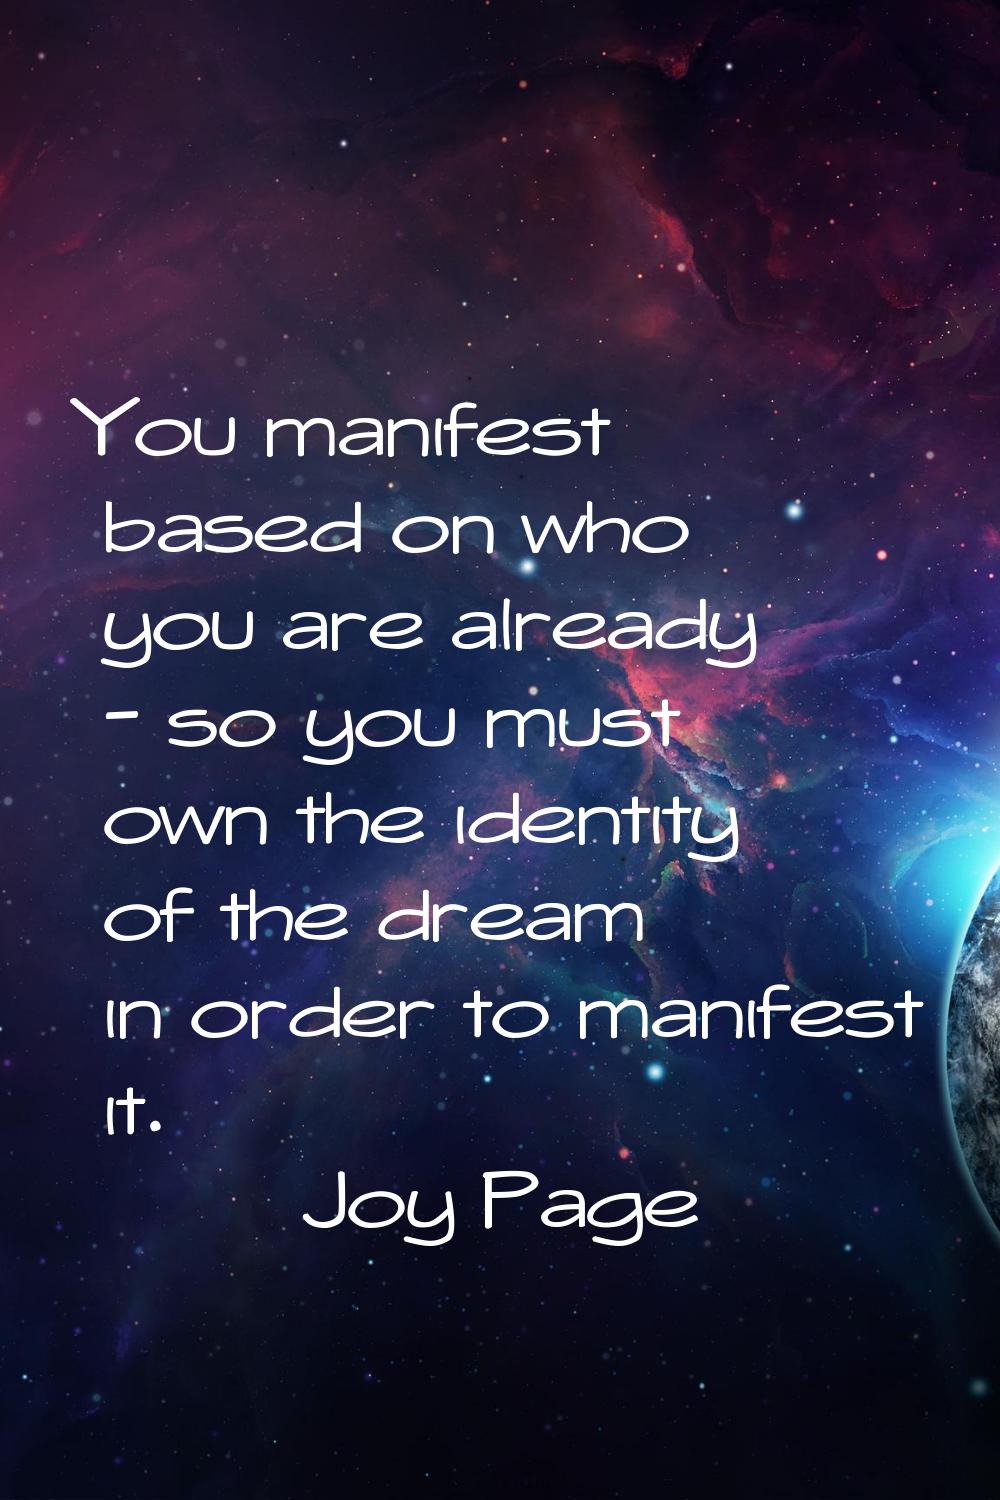 You manifest based on who you are already - so you must own the identity of the dream in order to m